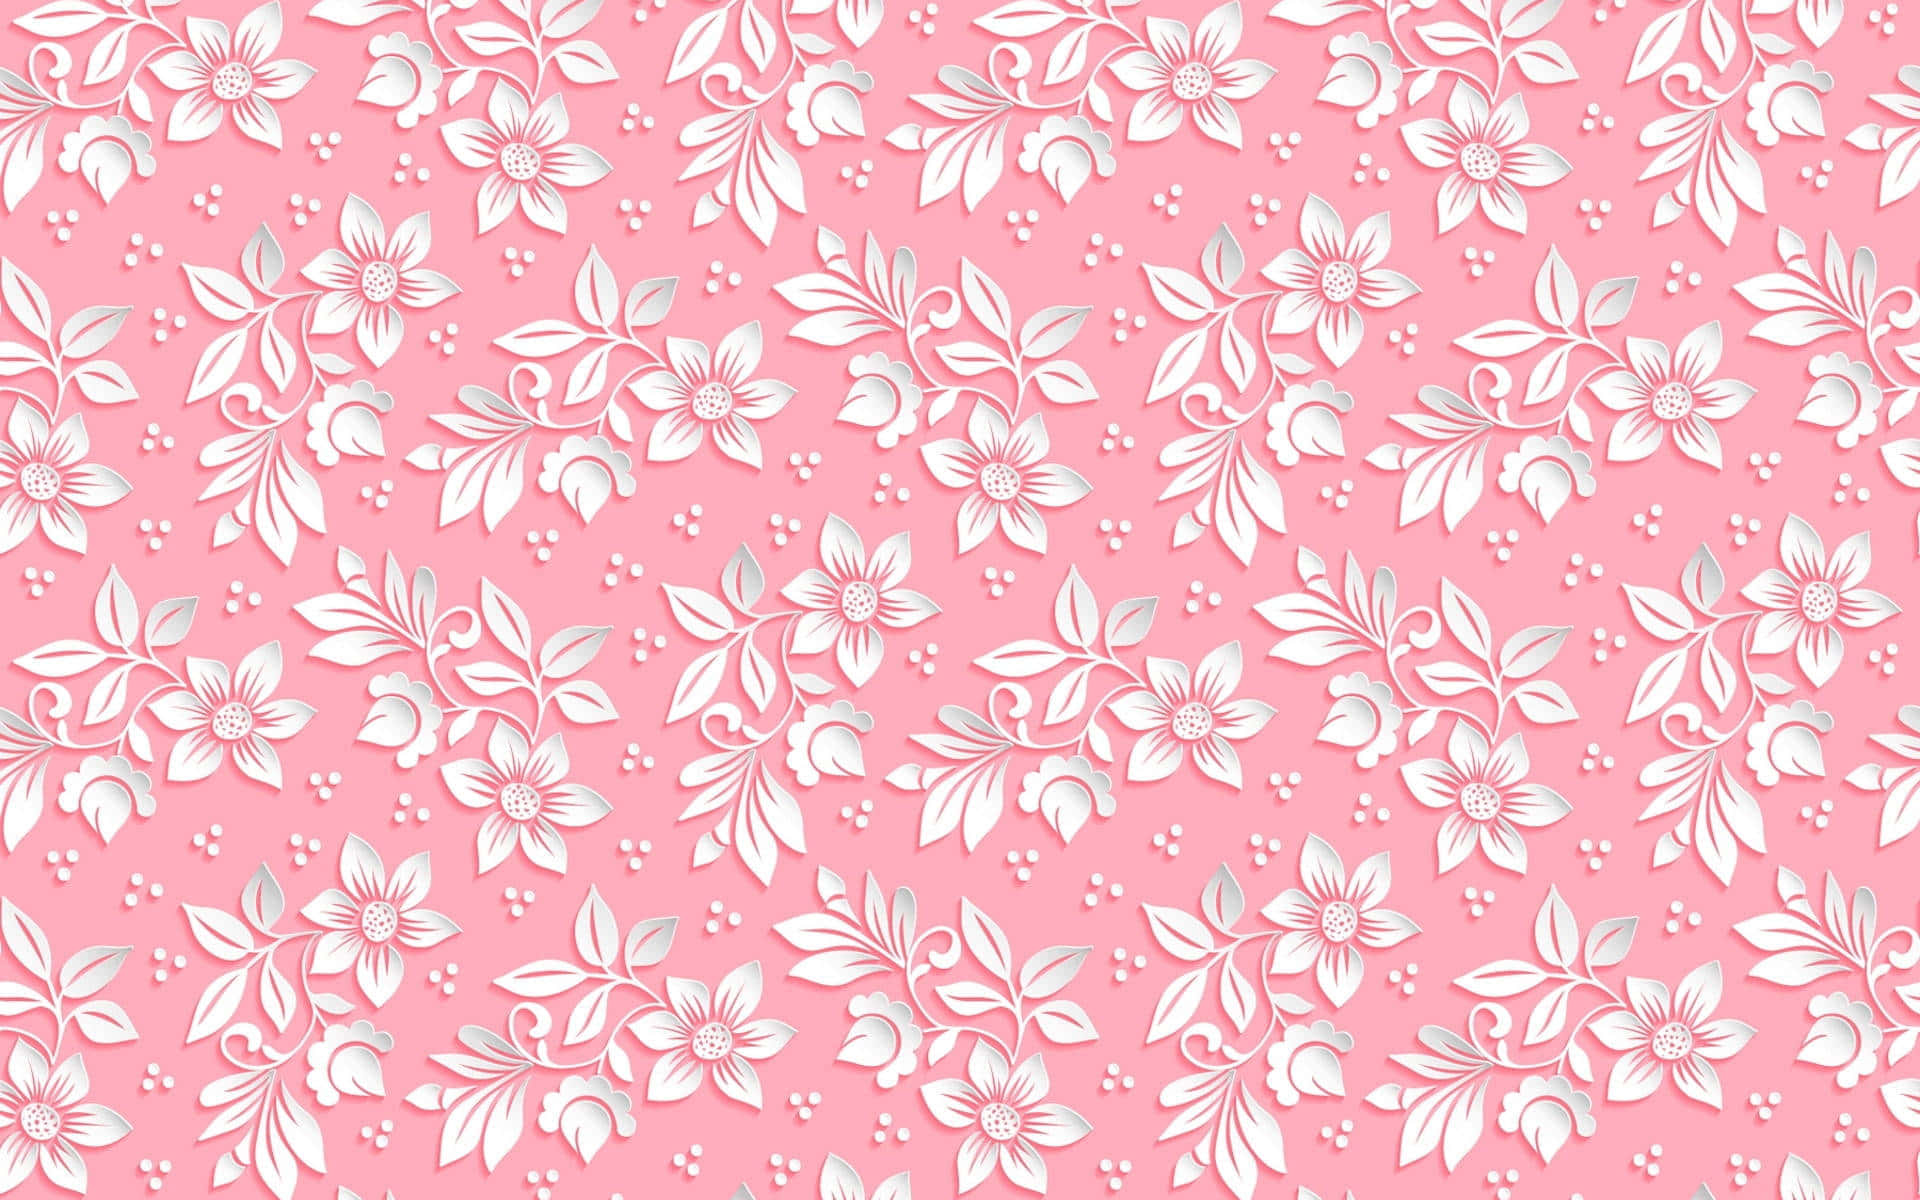 A Pink Floral Pattern With White Flowers Background